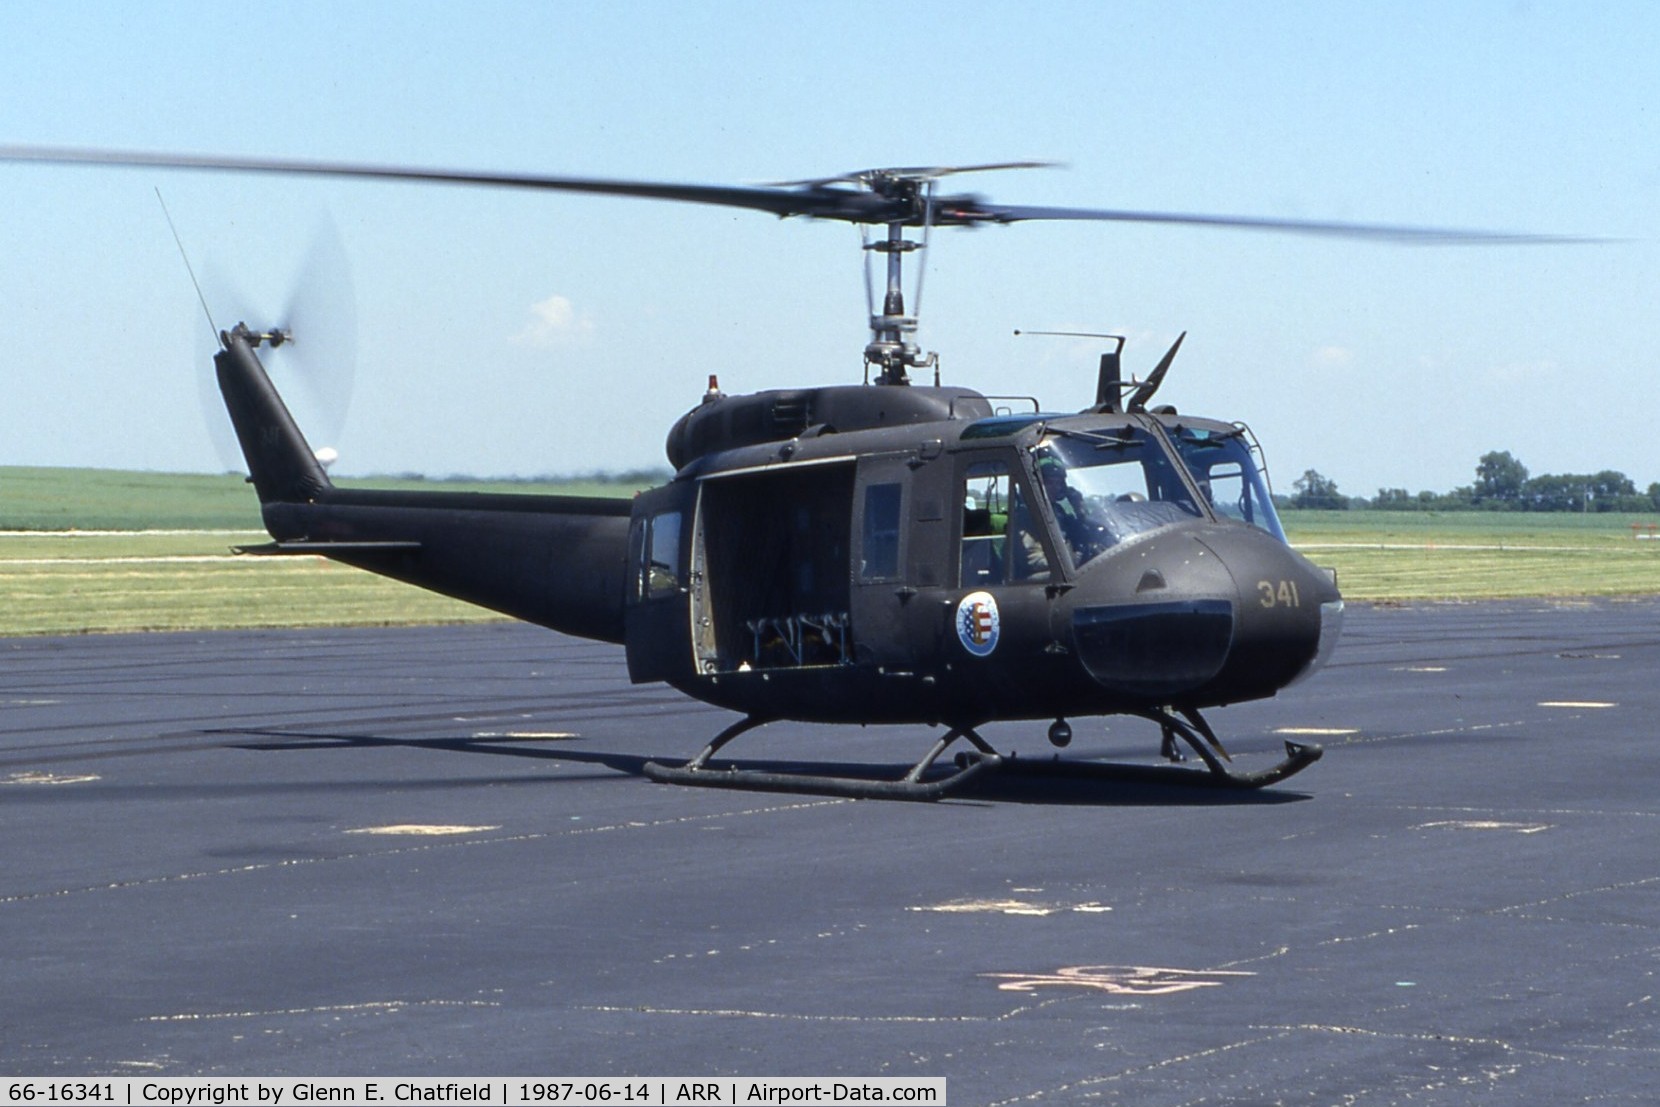 66-16341, 1966 Bell UH-1H Iroquois C/N 8535, UH-1H 66-16341 during an open house